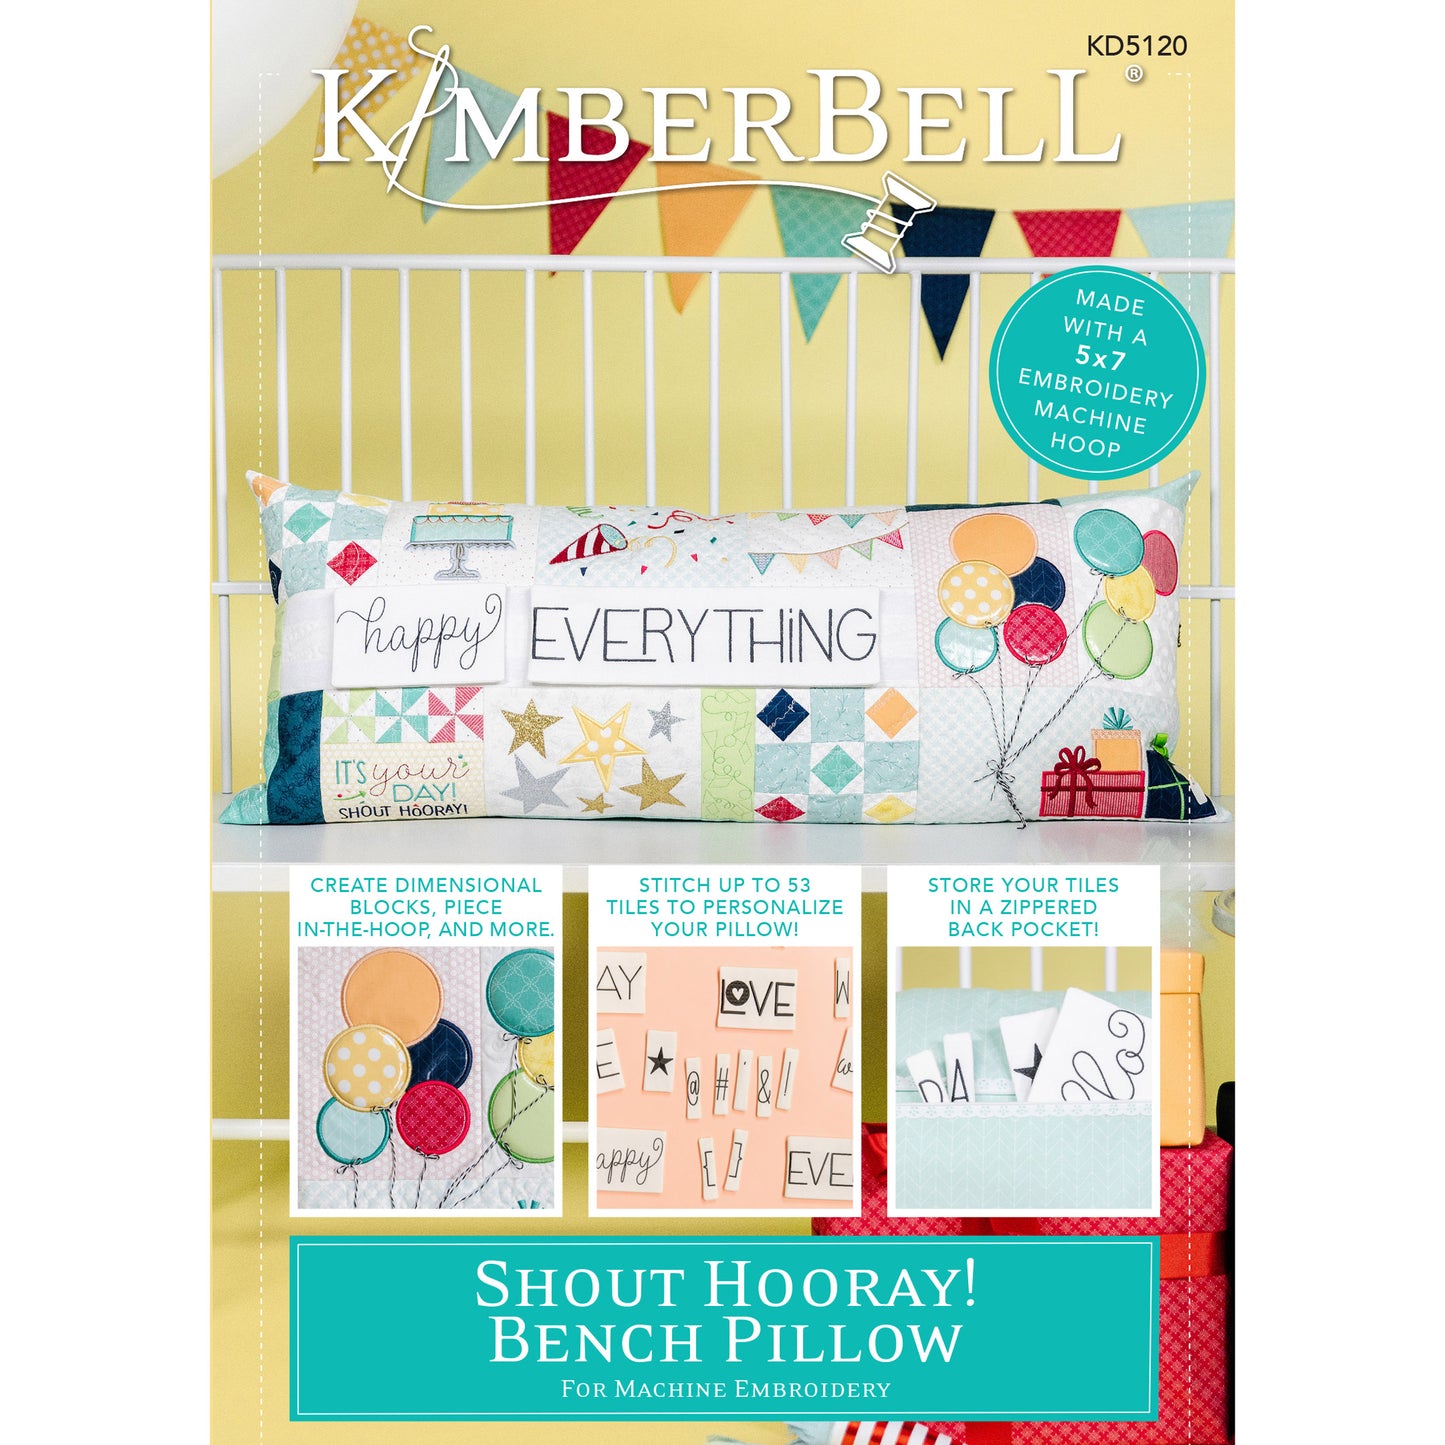 Kimberbell’s Shout Hooray! Bench Pillow Pattern (KD5120) celebrates the people you love with confetti, cake, and more! Stitch names, dates, and greetings with the included alphabet and sentiments, then feature your message in the letterboard panel. Image shows the front packaging.